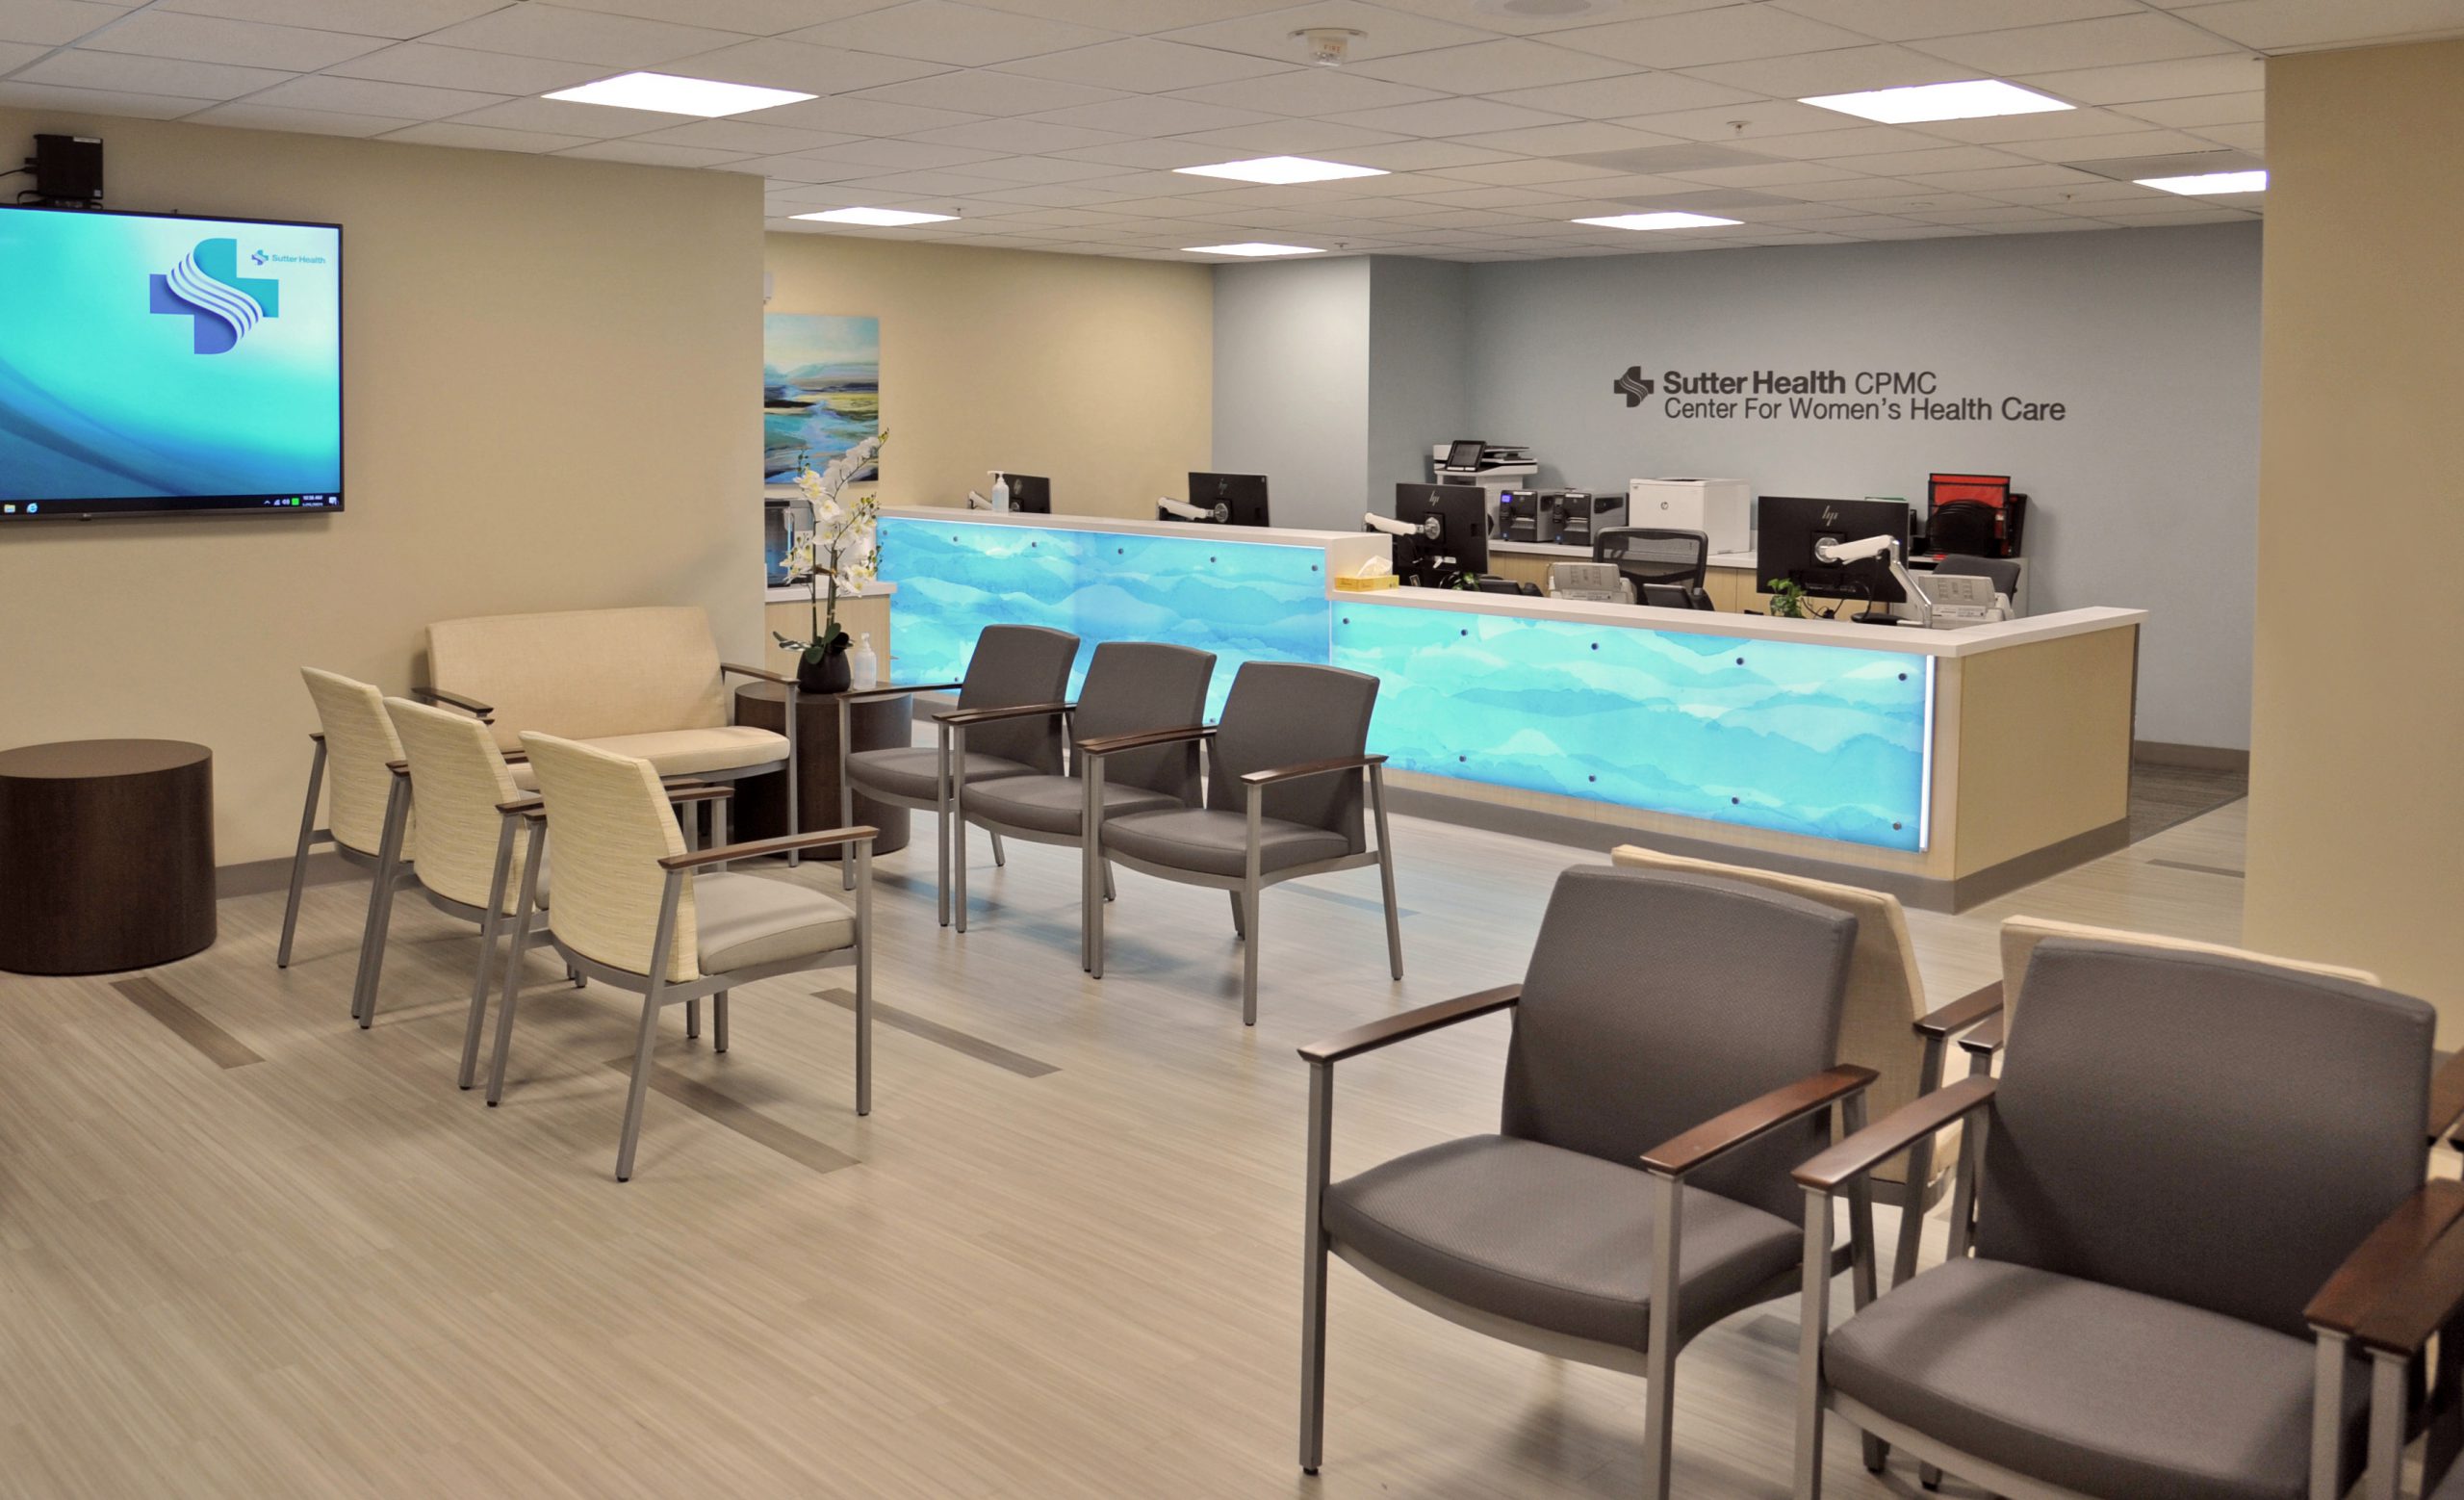 Sutter CPMC's new Center for Women's Health Care patient waiting room